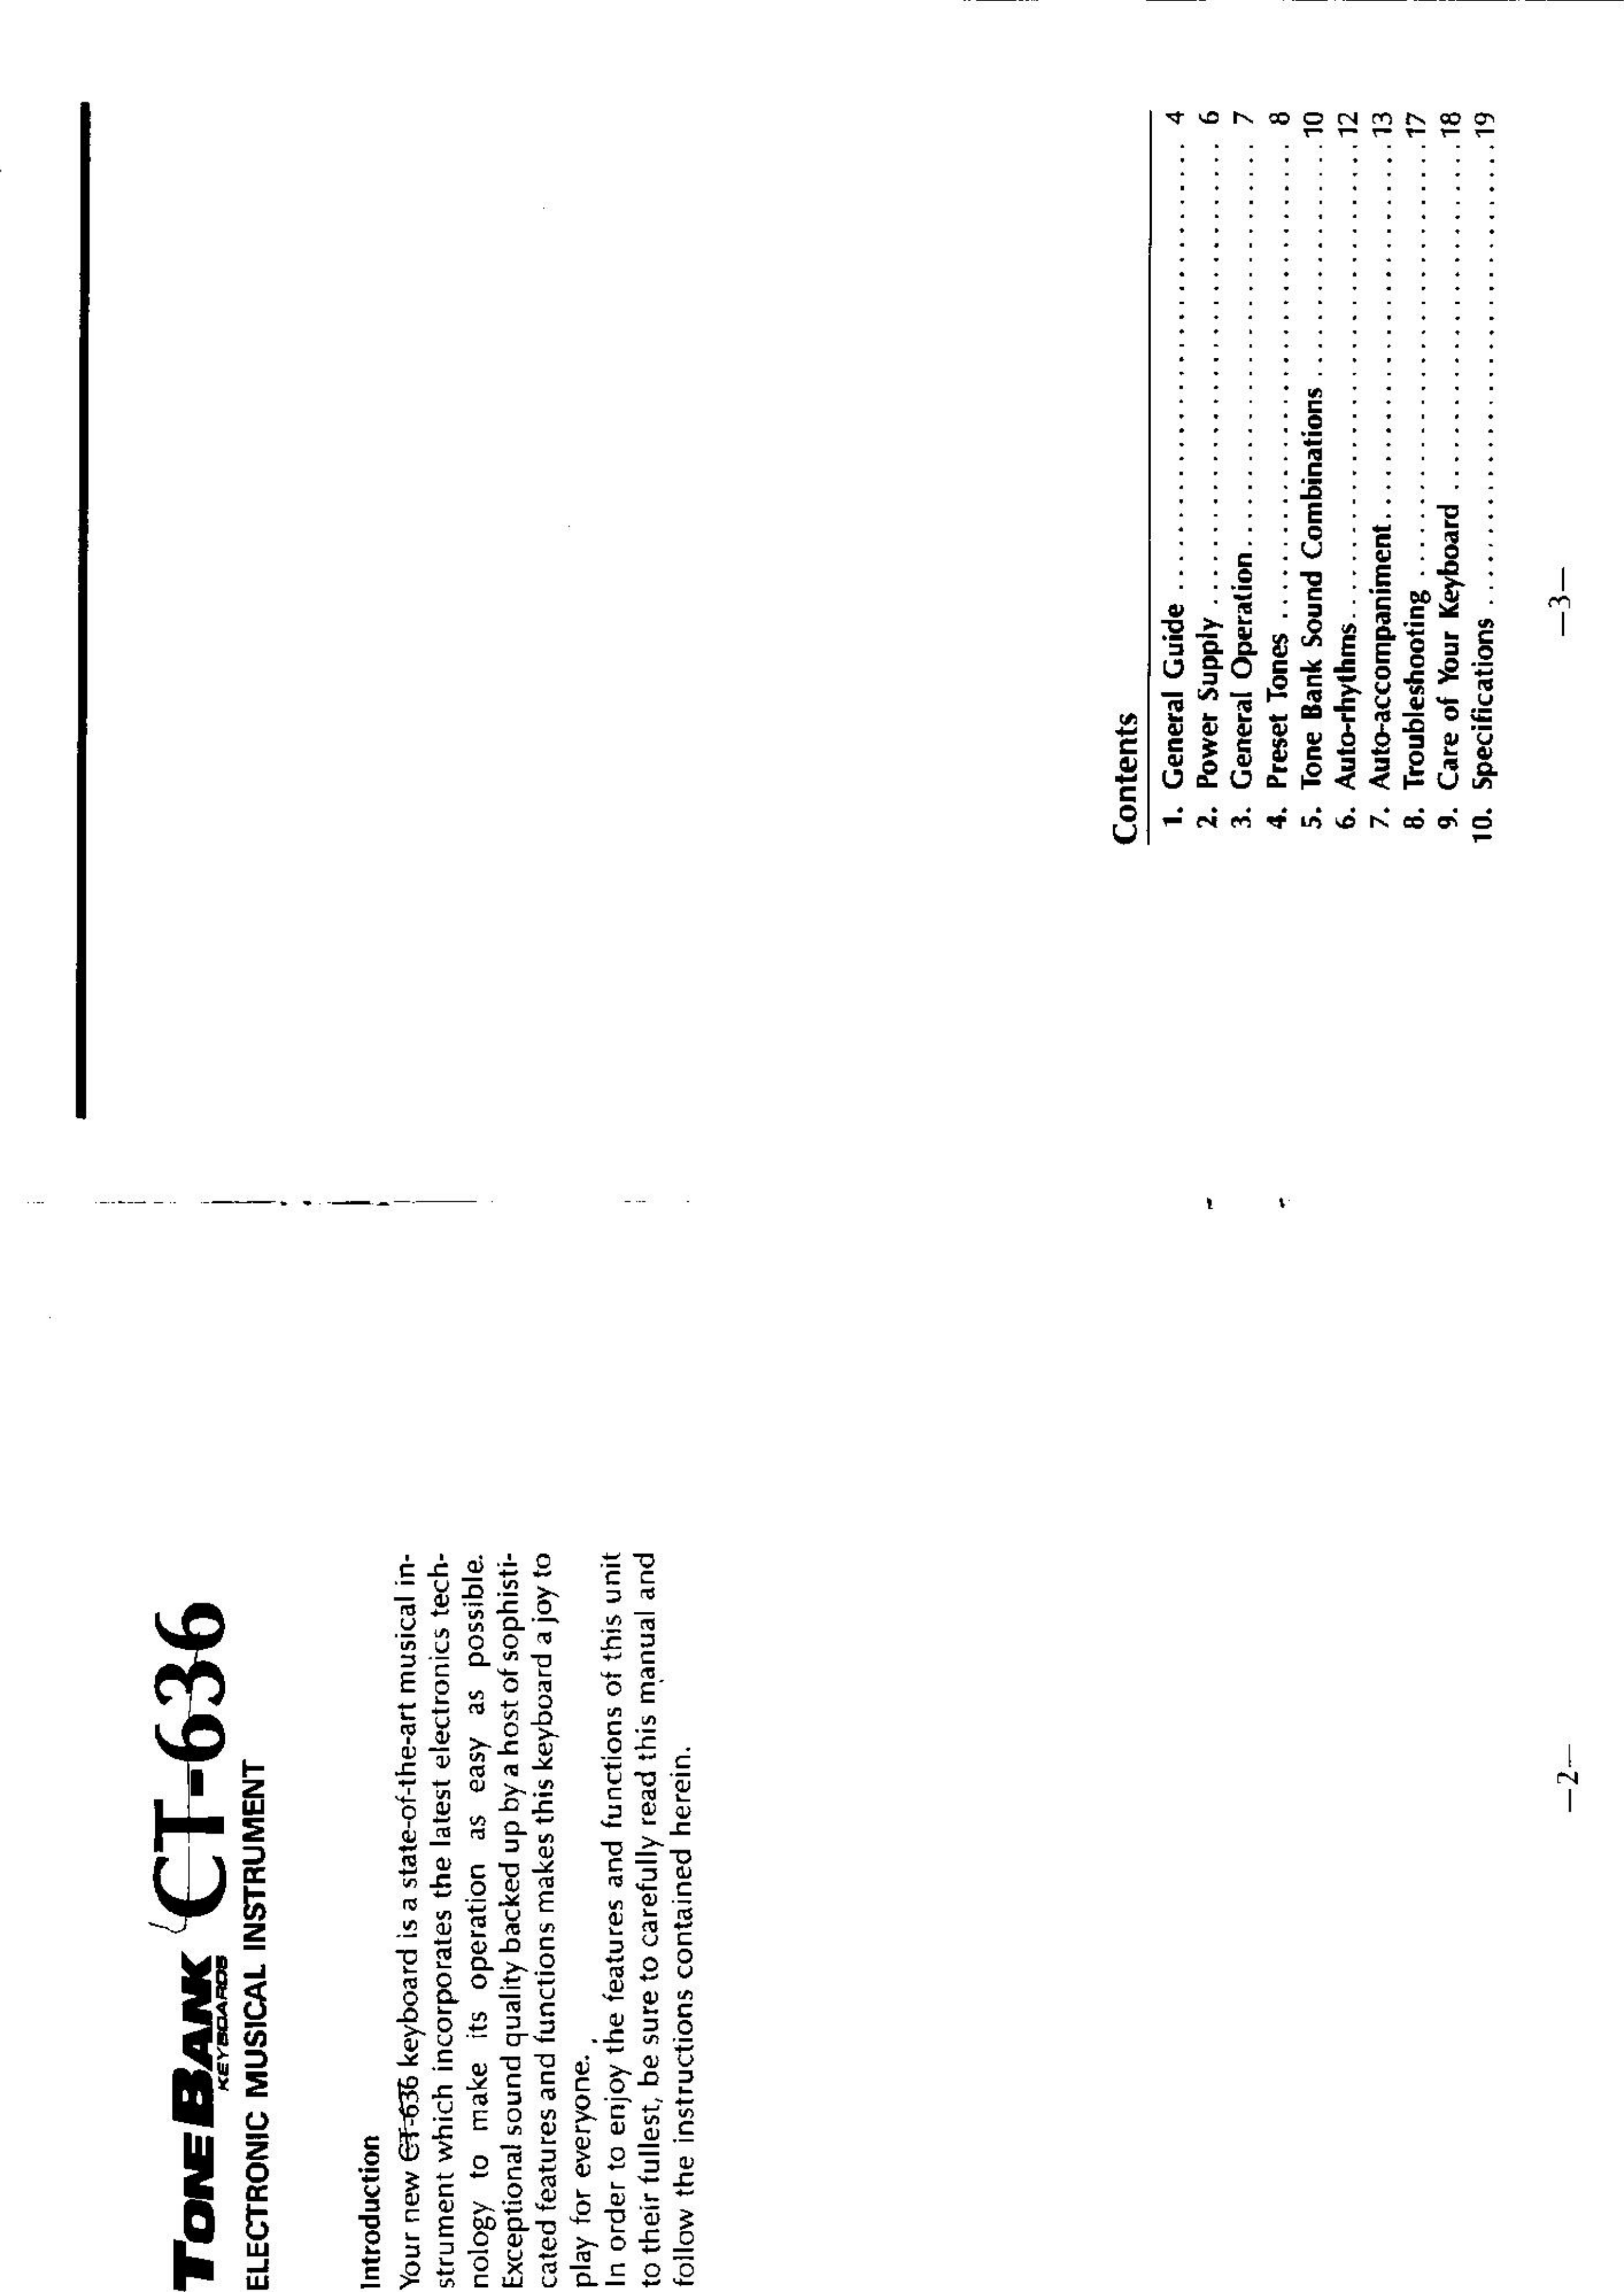 Page 2 of 10 - Casio Casio-Tone-Bank-Ct636-Users-Manual-  Casio-tone-bank-ct636-users-manual